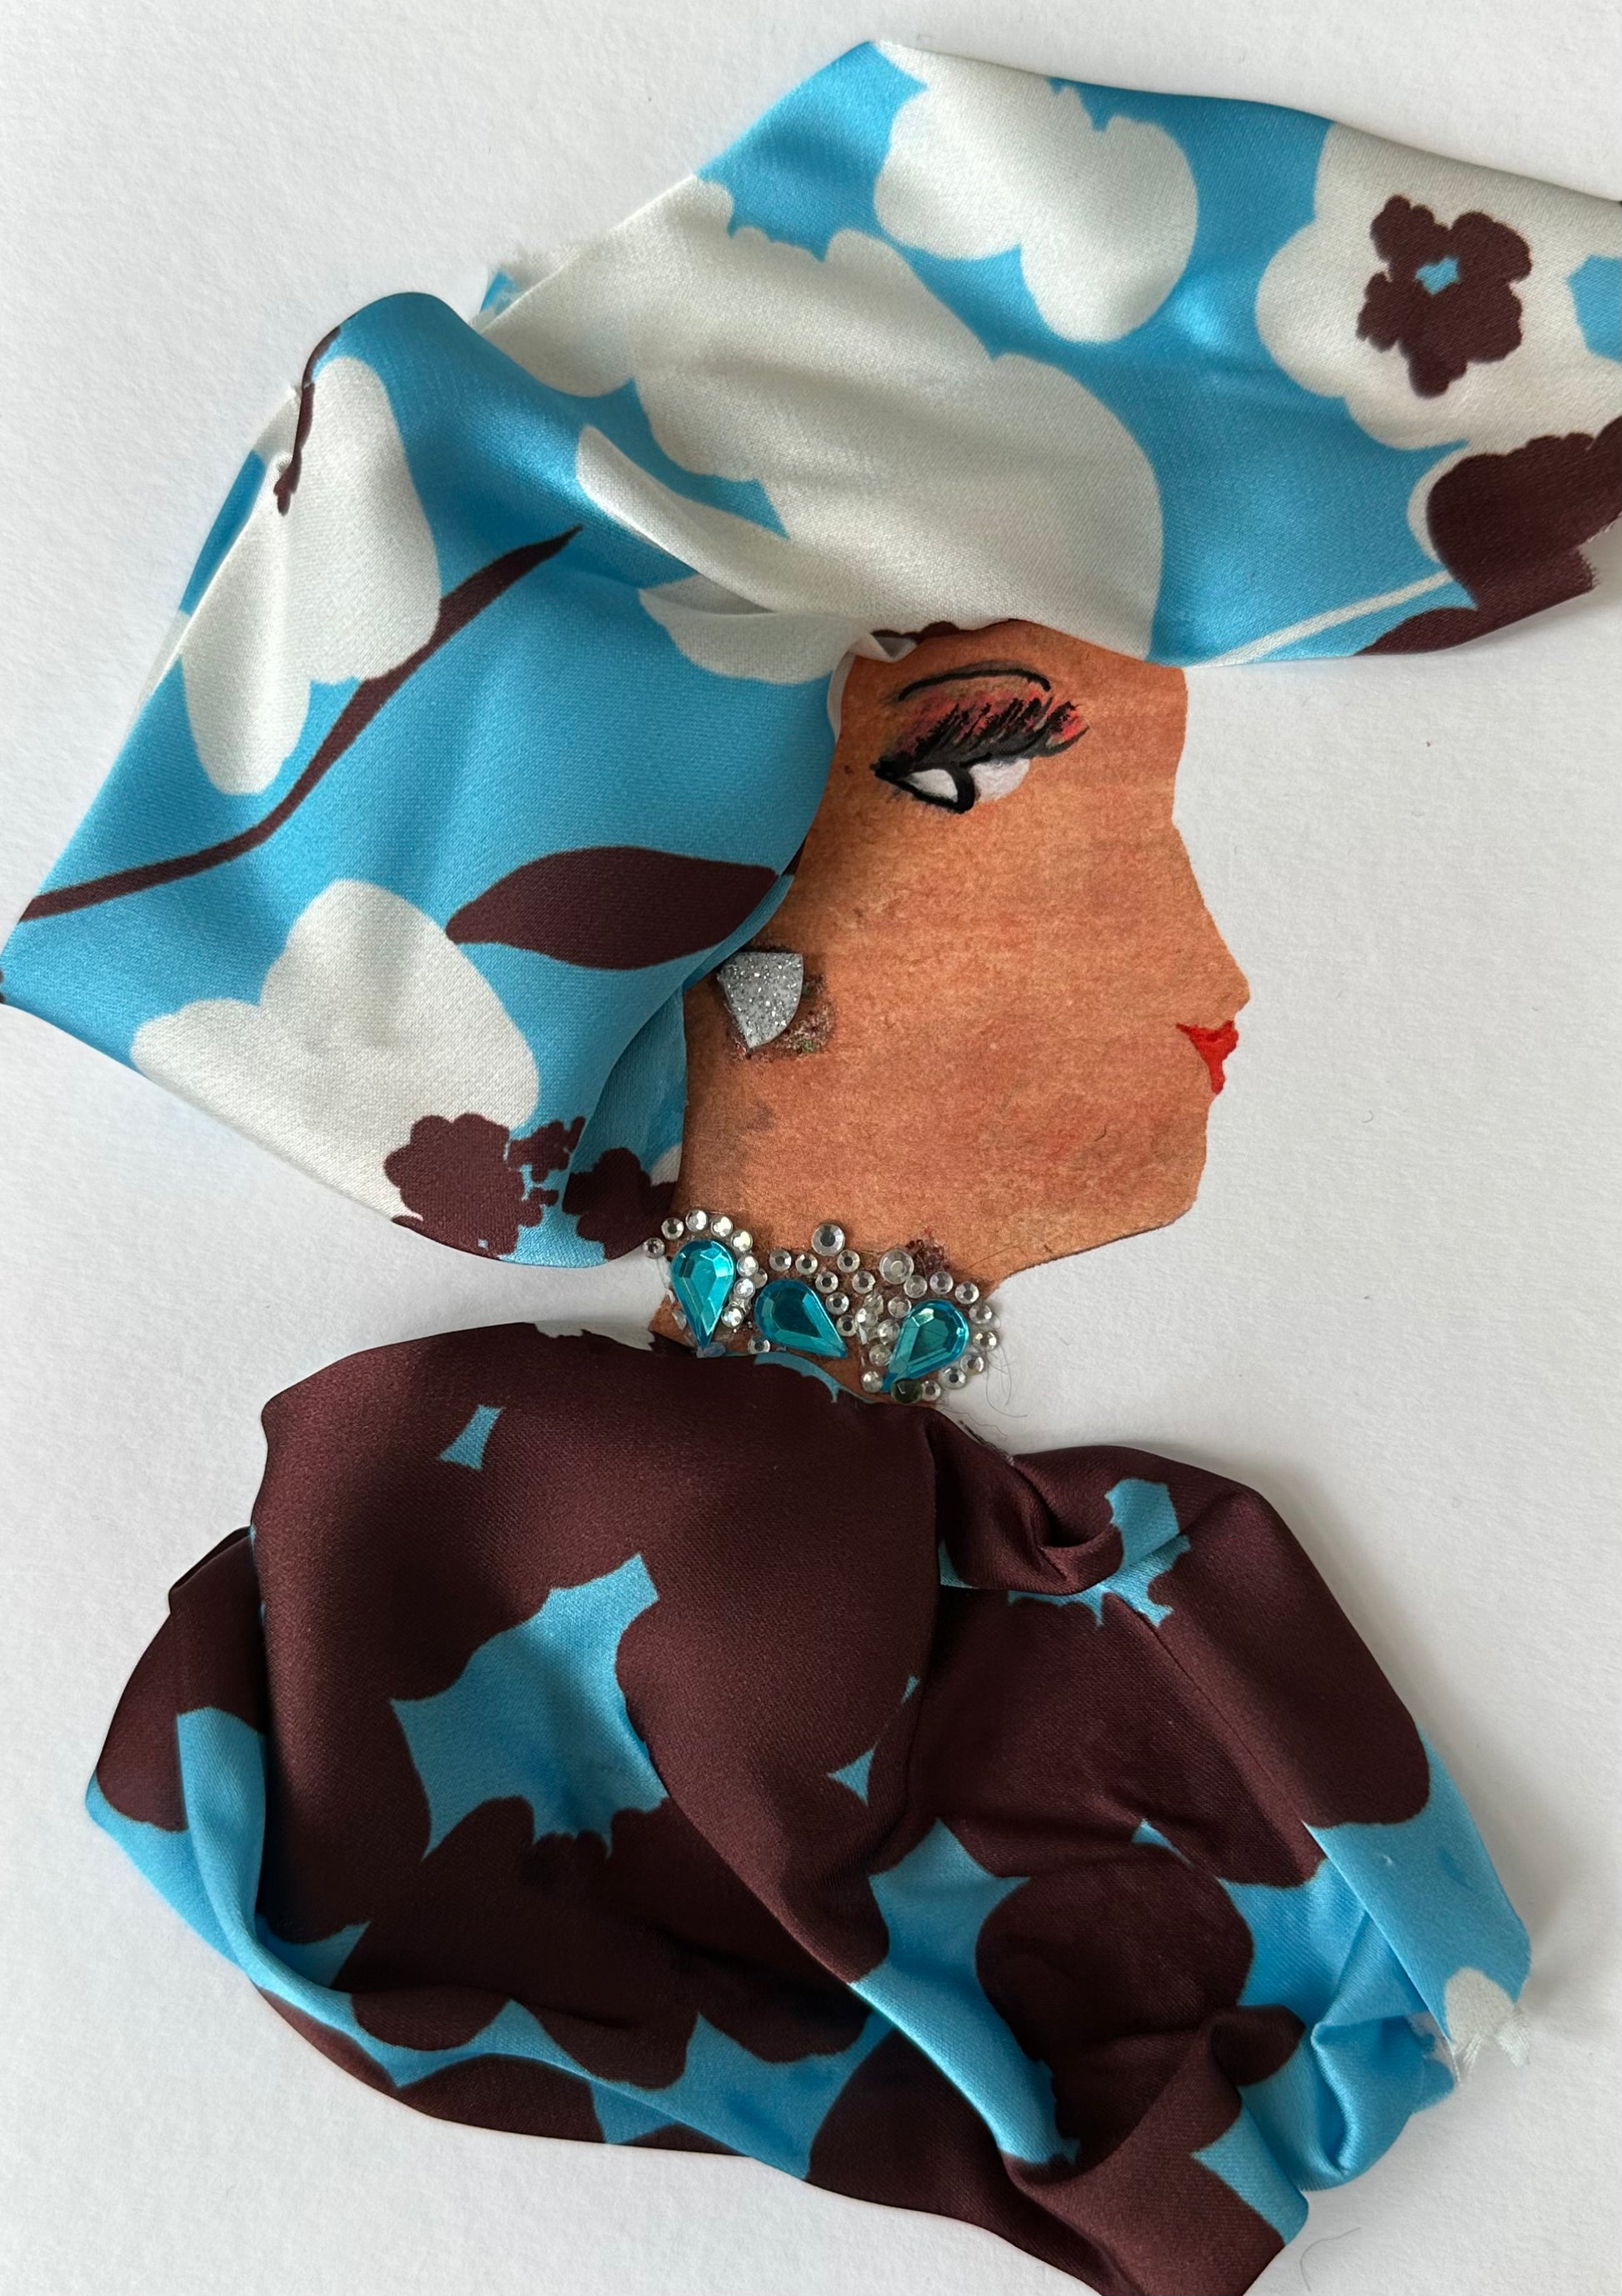 I designed this handmade card of a woman, Newbury Nadia, who is dressed in a powder blue, chocolate brown, and white floral material. This material makes up both her blouse and hatinator. Her outfit is completed with teal gemstone jewellery.